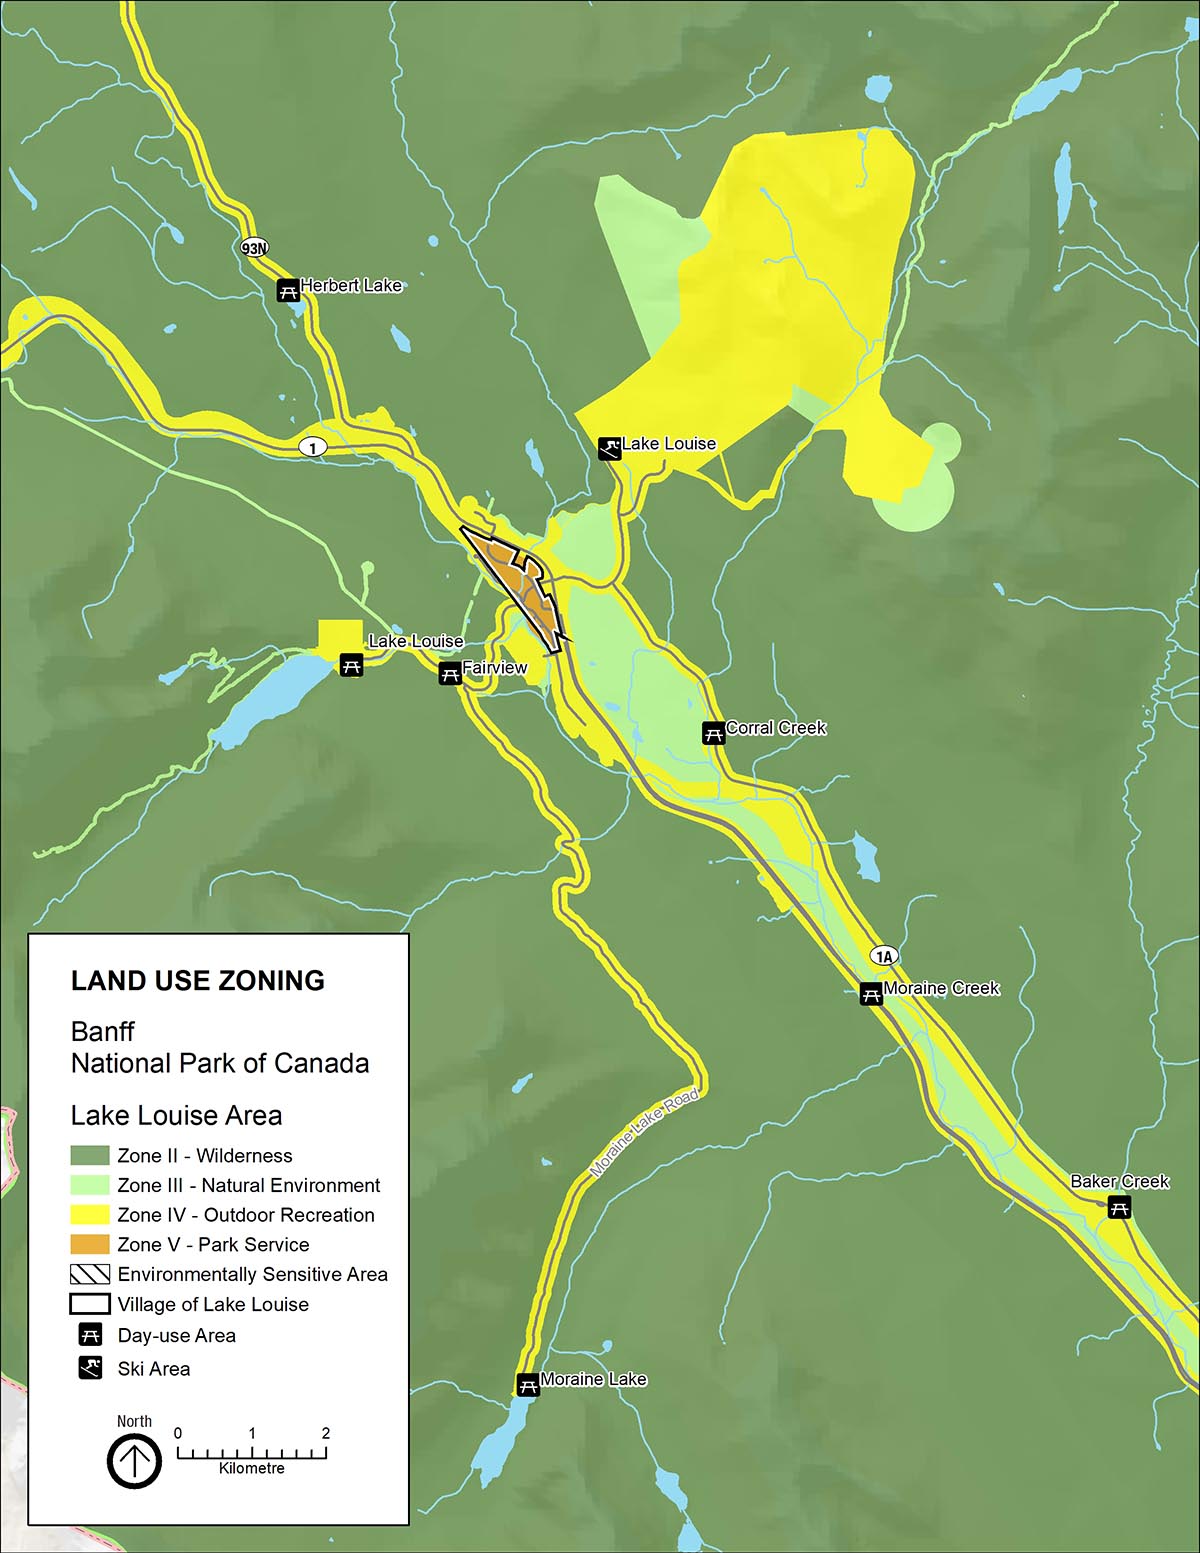  Map 8: Zoning in the Lake Louise area